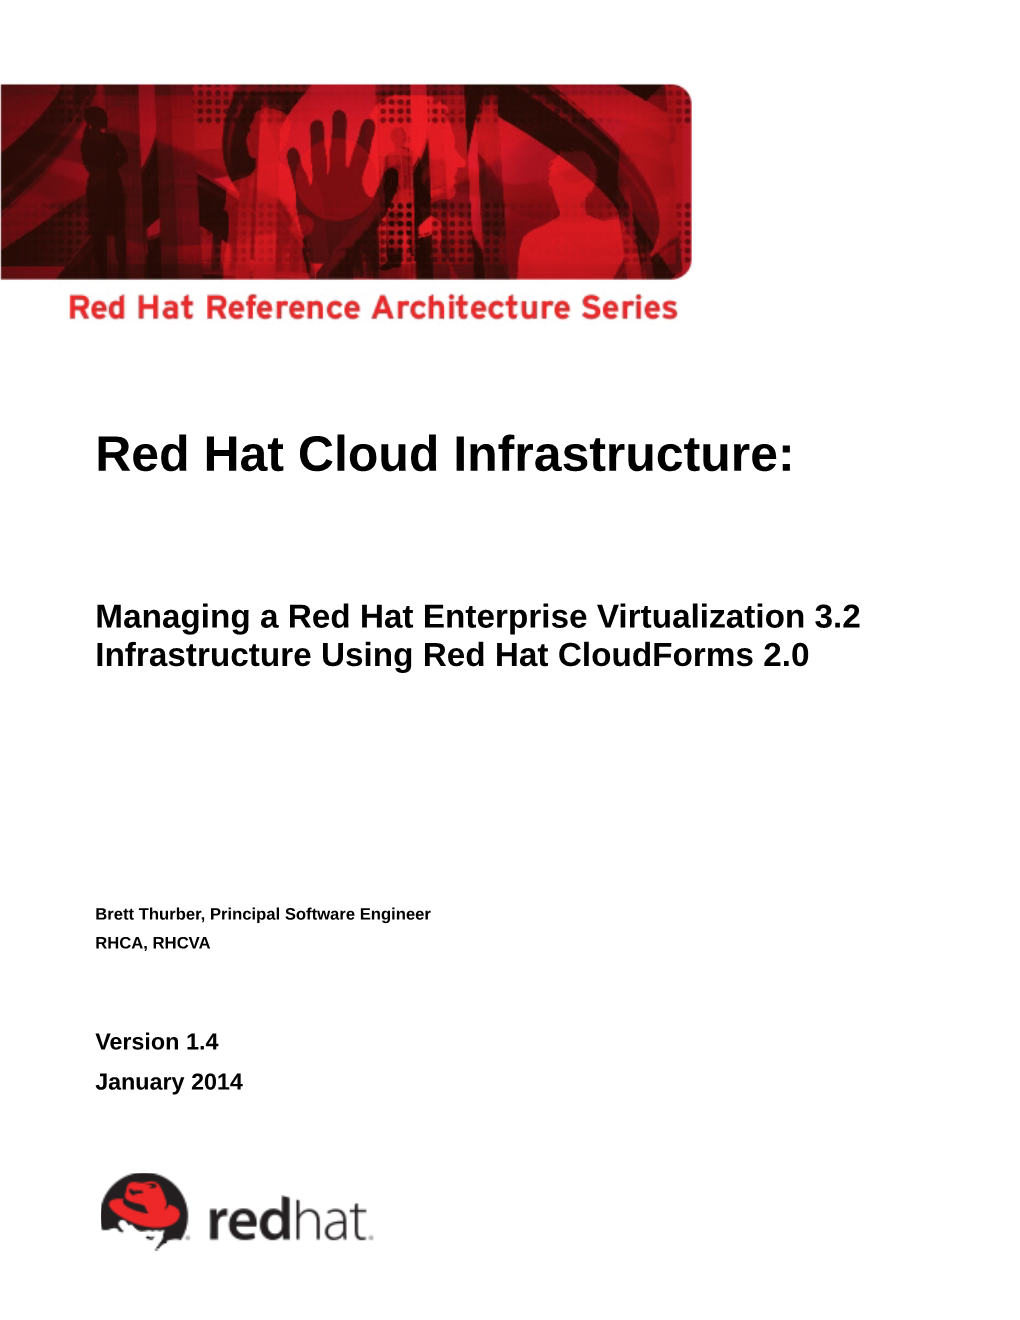 Red Hat Cloud Infrastructure